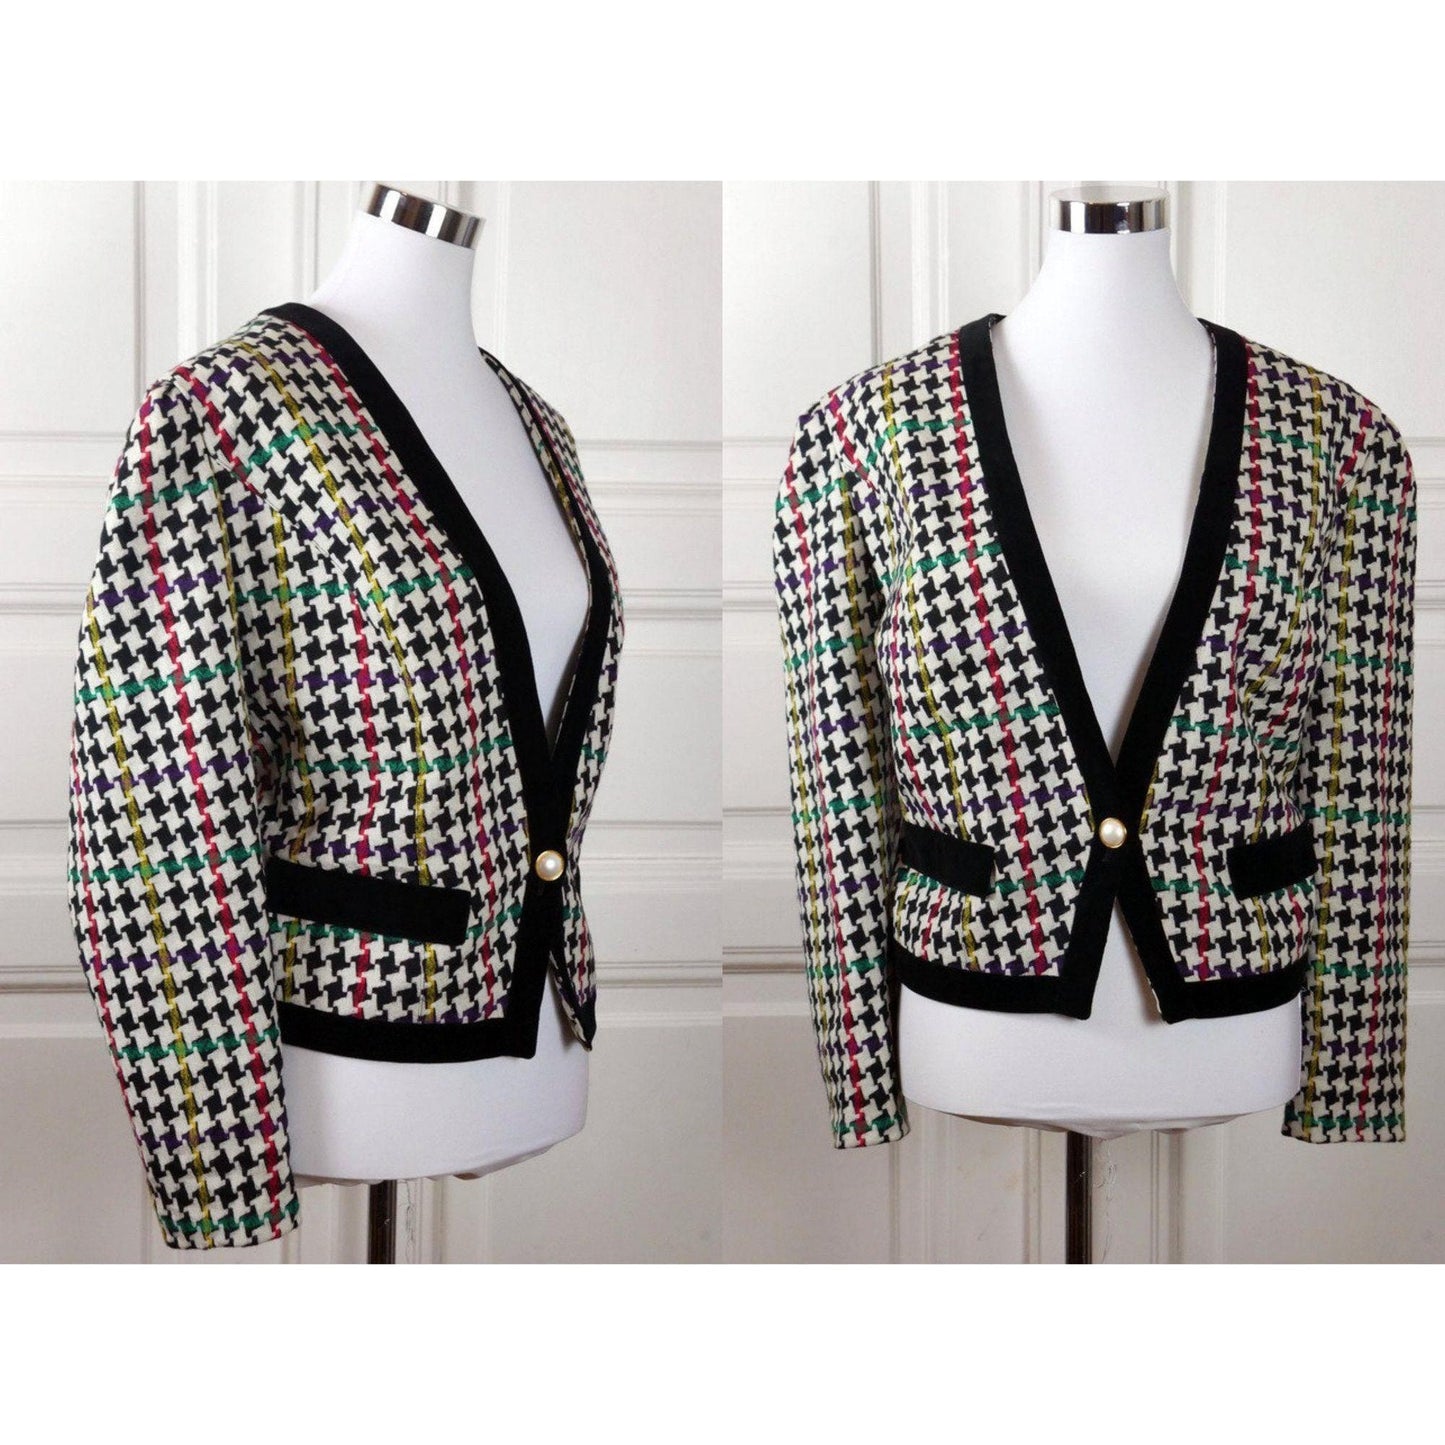 1980s Women's Cropped Blazer | Vintage Black White Red Purple Green & Yellow Houndstooth Jacket with Velvet Trim | Large